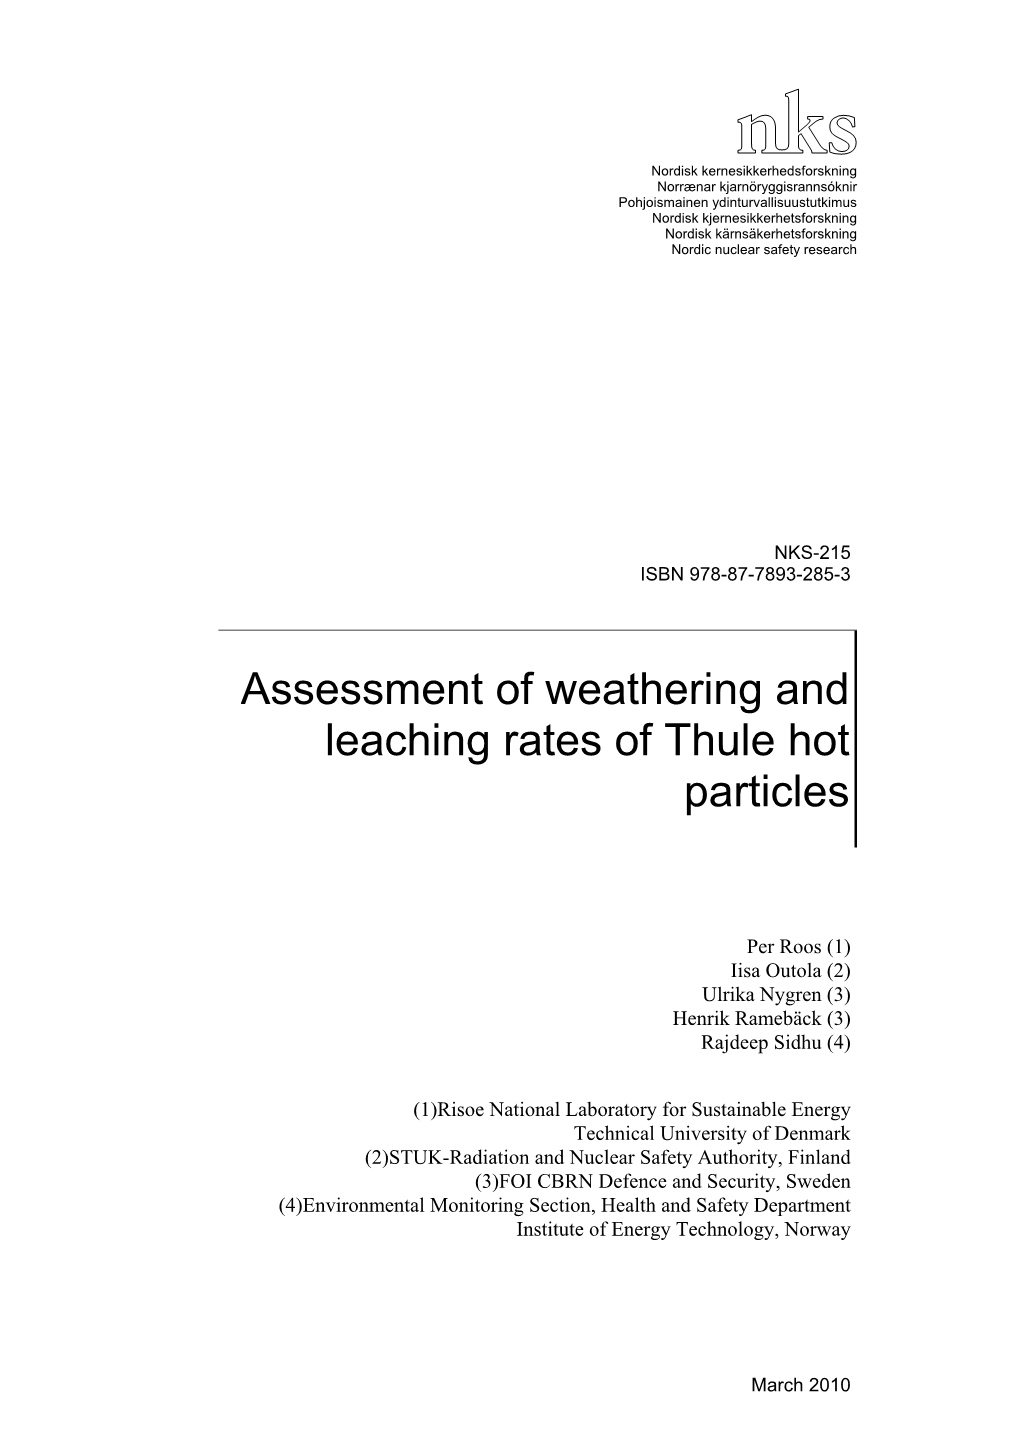 NKS-215, Assessment of Weathering and Leaching Rates of Thule Hot